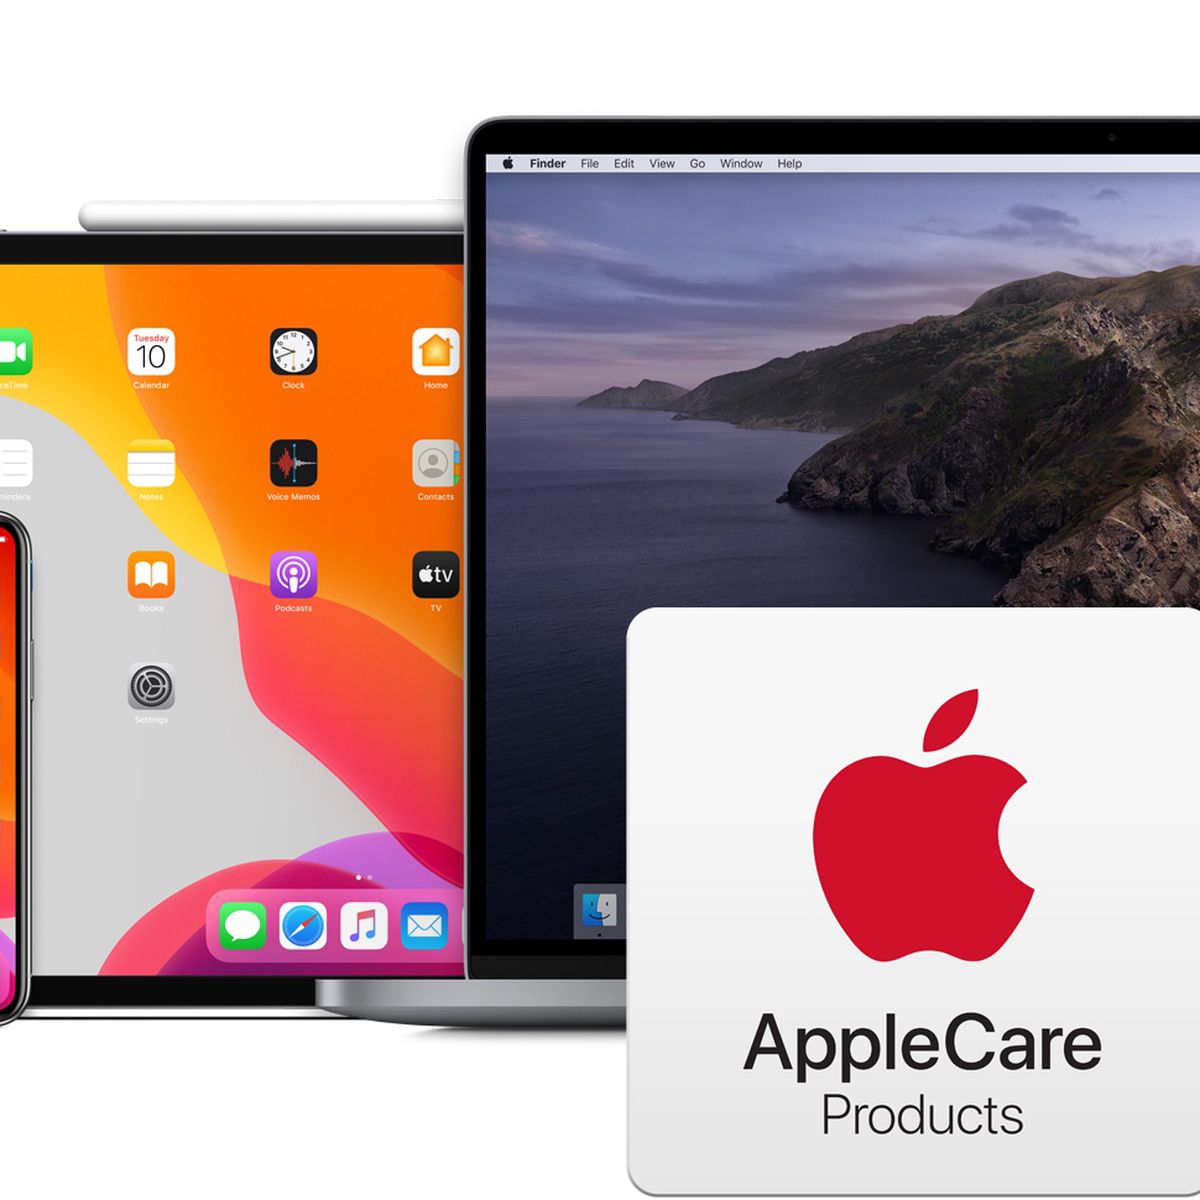 ho much is applecare for macbook pro